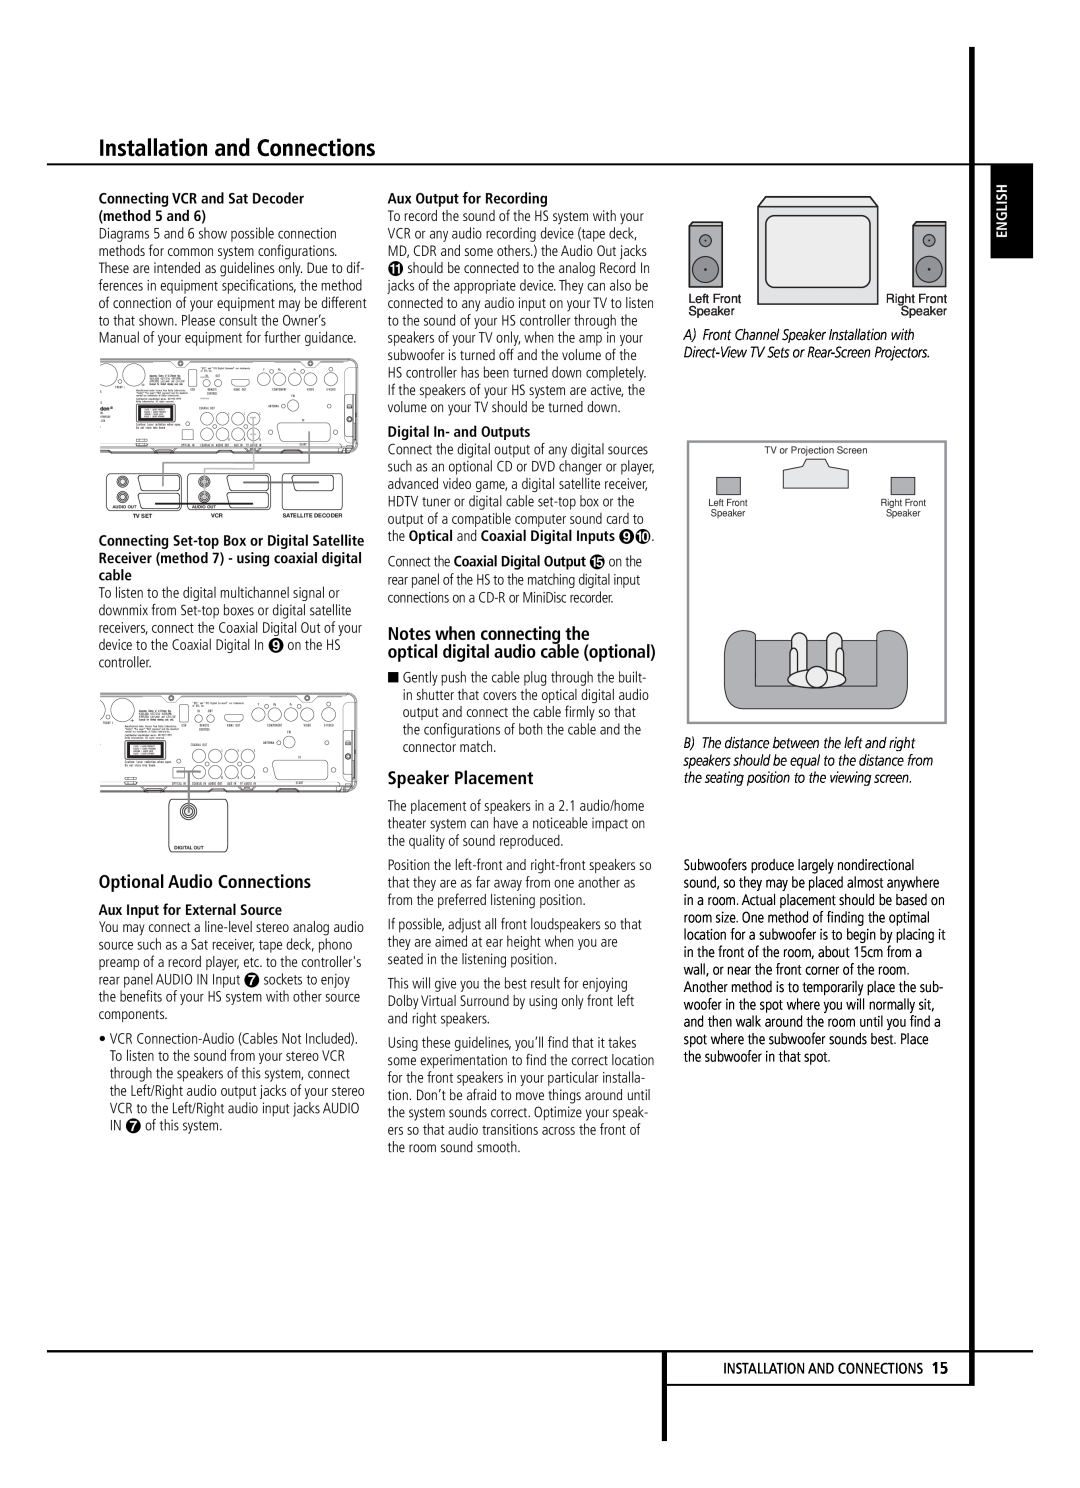 Harman-Kardon HS 150 owner manual Notes when connecting the, Optional Audio Connections, Speaker Placement, English 